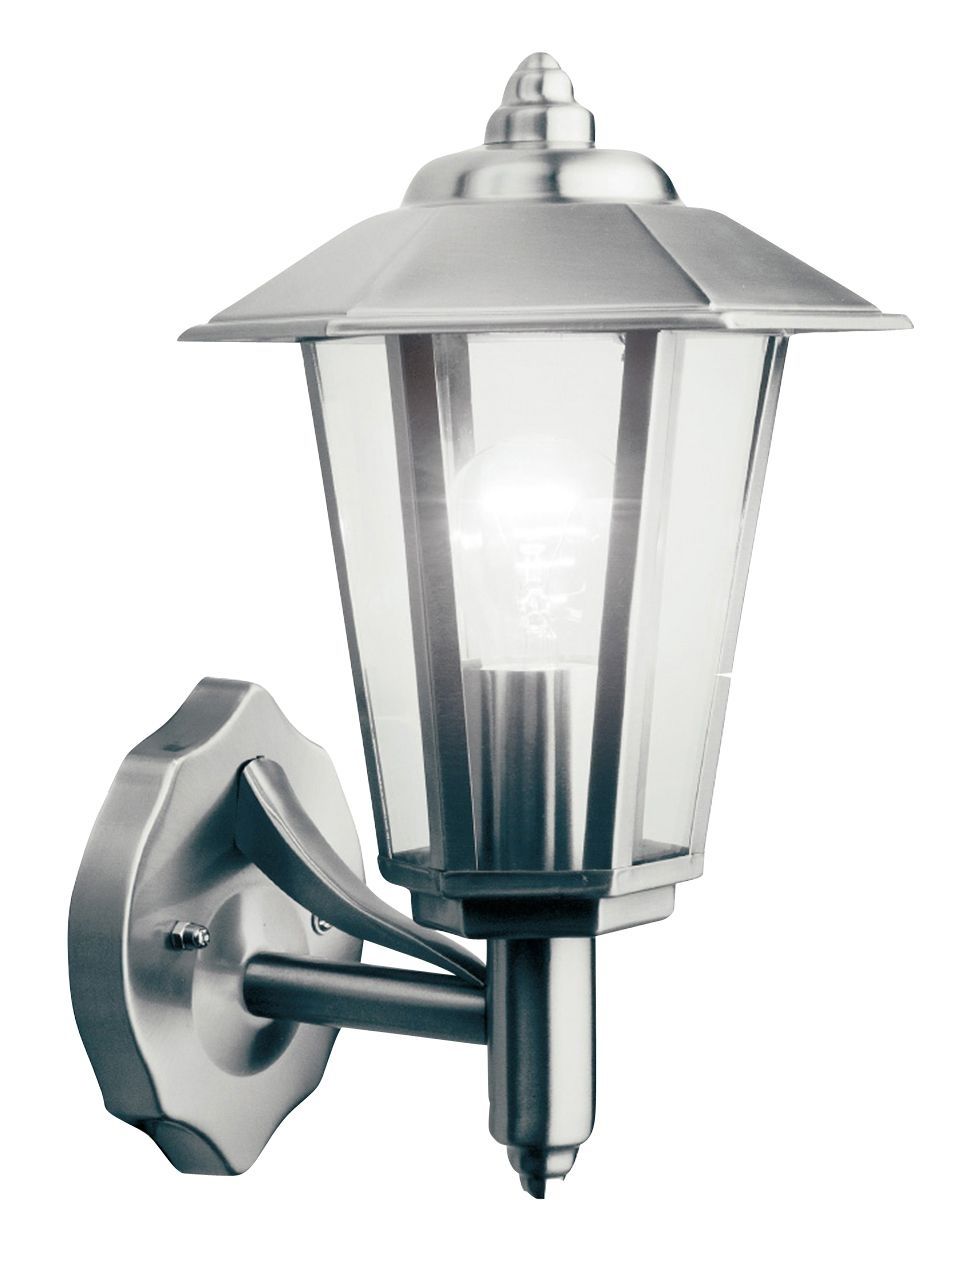 Newport Mains Powered External Wall Lantern | Departments | Diy At With Regard To Chrome Outdoor Wall Lighting (View 7 of 15)